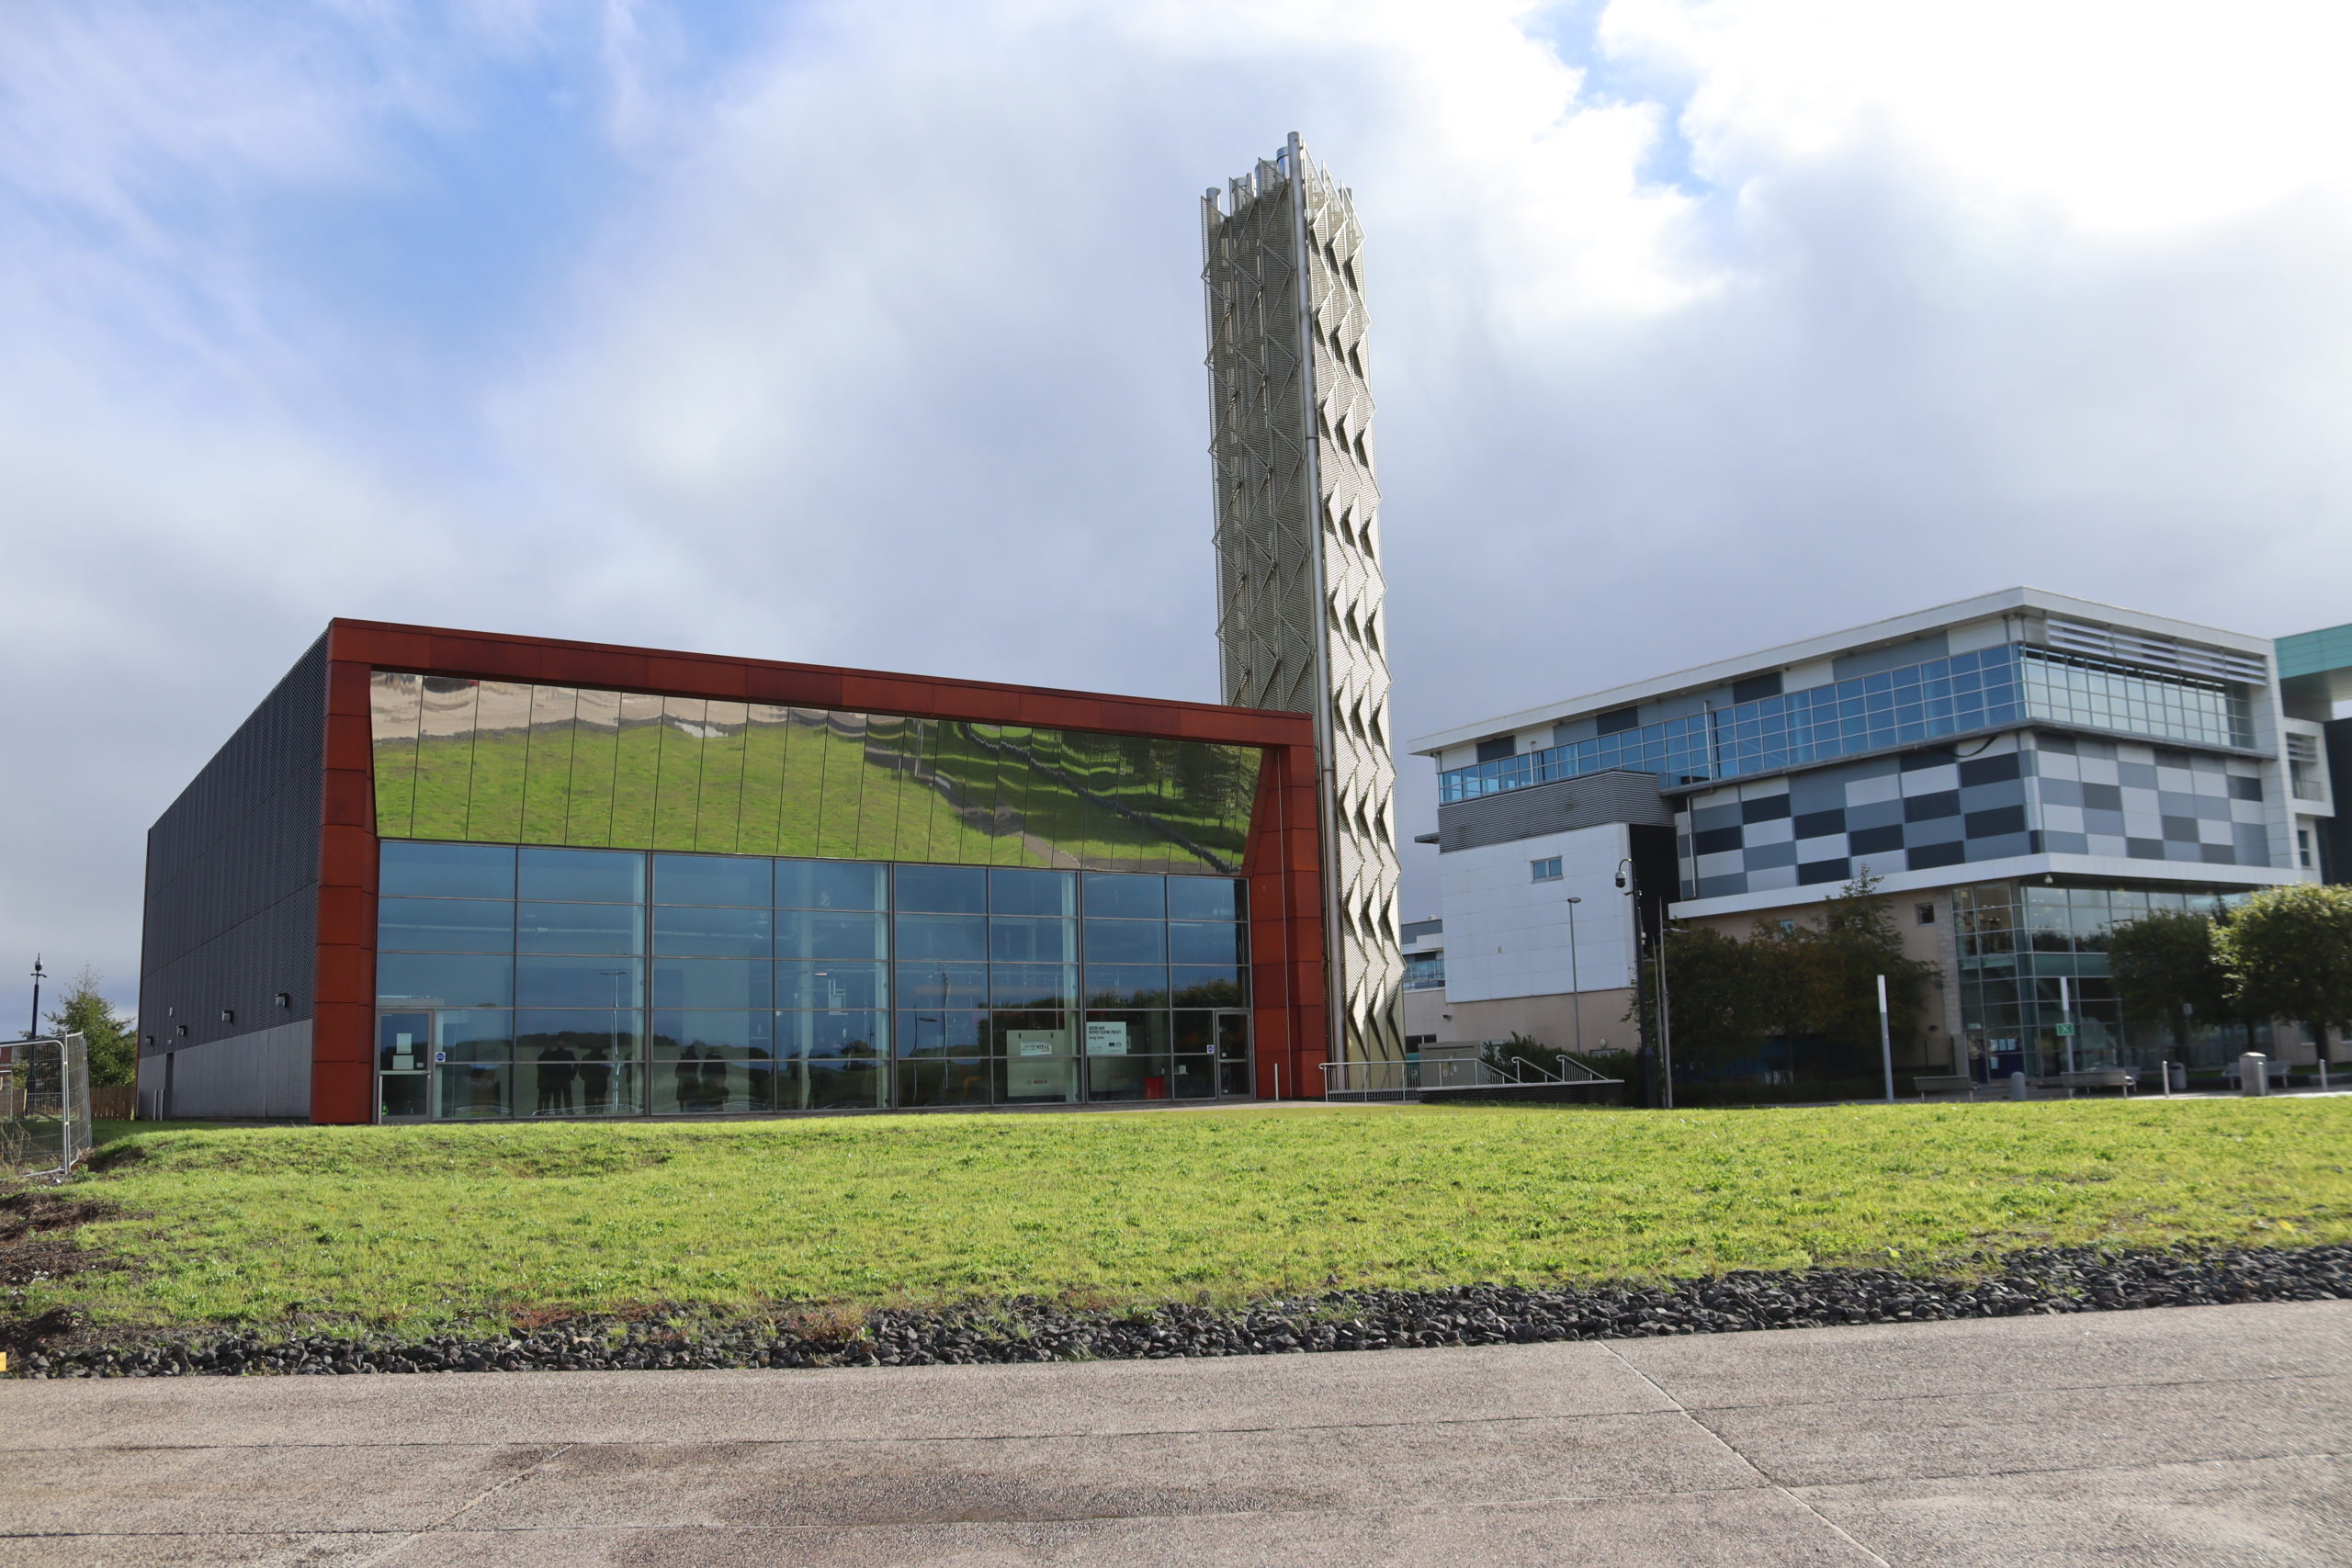 Clydebank Energy Centre where Star's water source heat pumps for district heating are housed